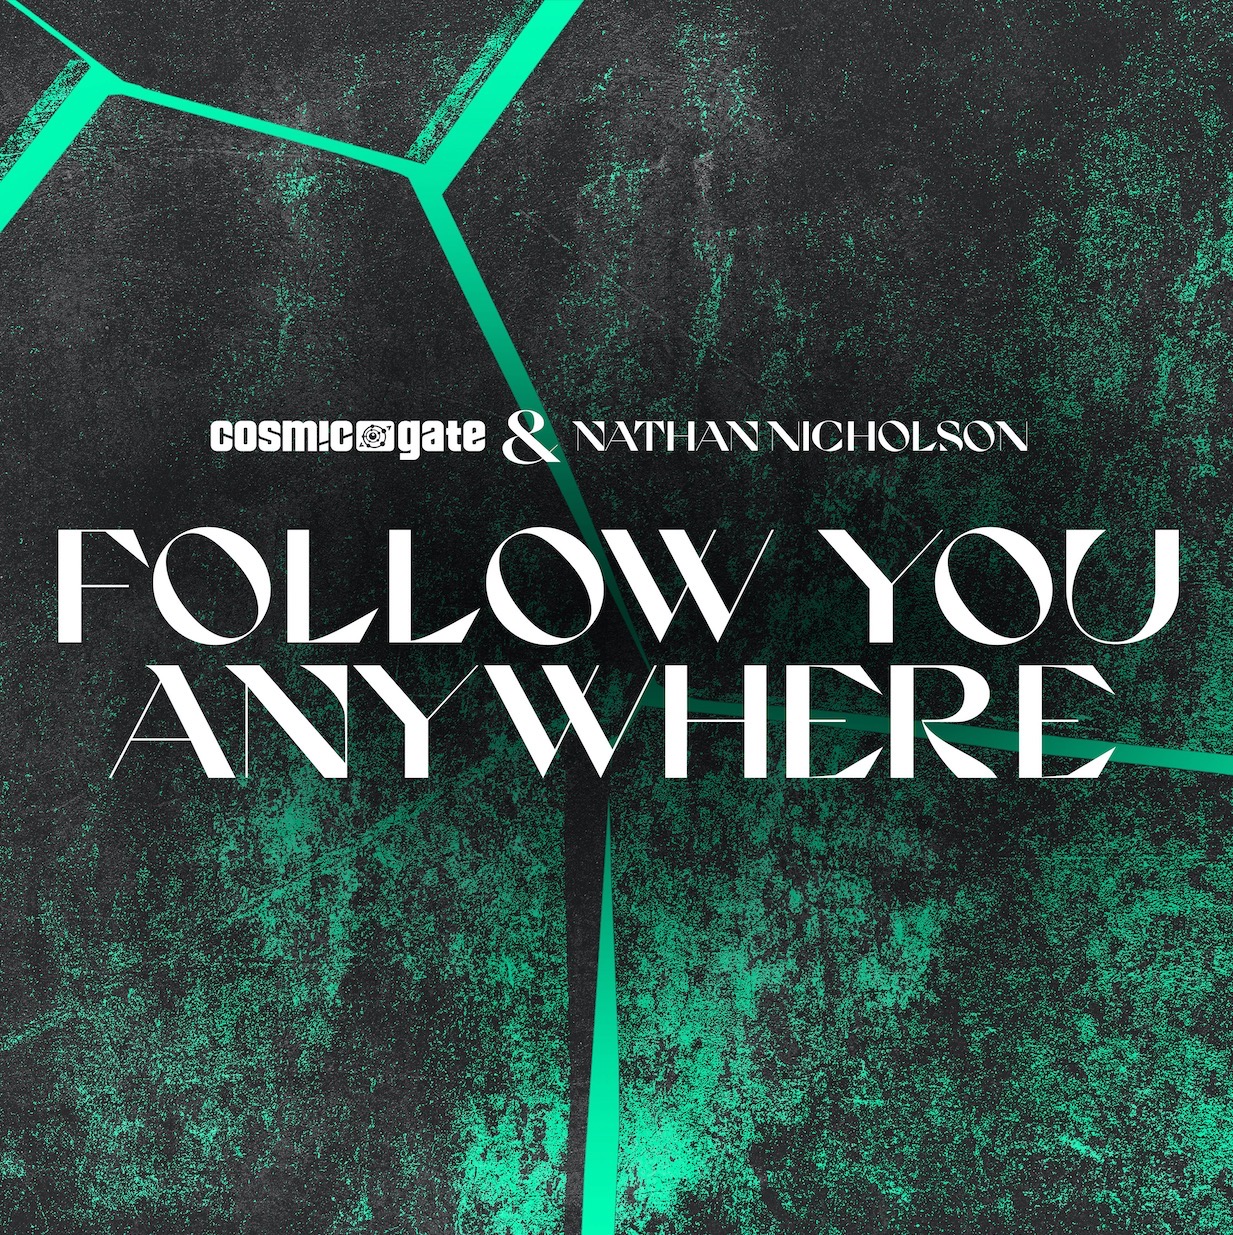 Cosmic Gate and Nathan Nicholson presents Follow You Anywhere on Black Hole Recordings